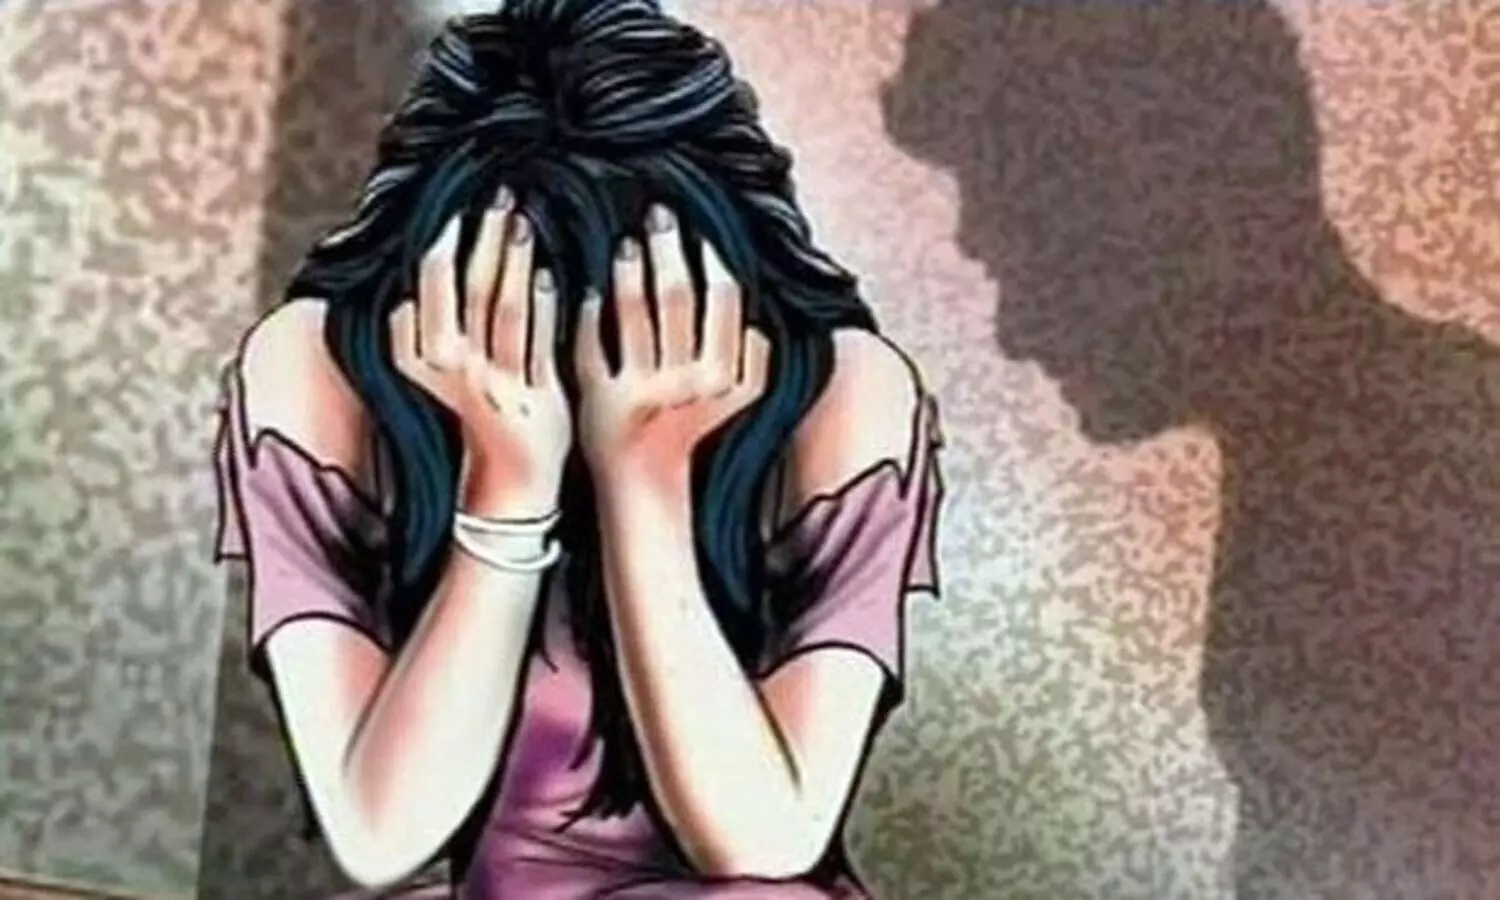 Homestay employee gang-raped, assaulted in Agra; 5 arrested